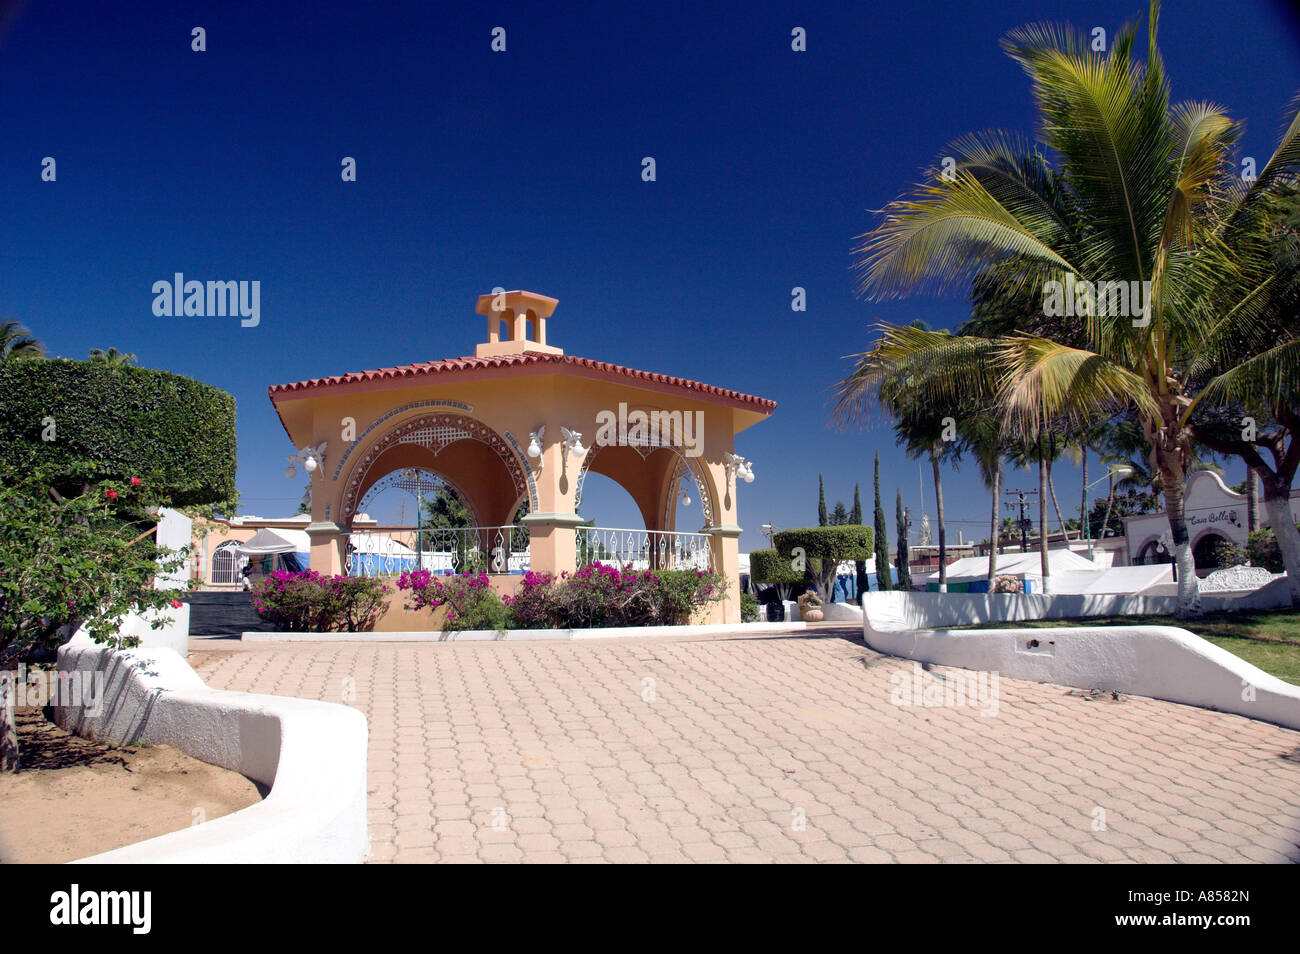 A bandstand in a city square in Cabo San Lucas Mexico Stock Photo